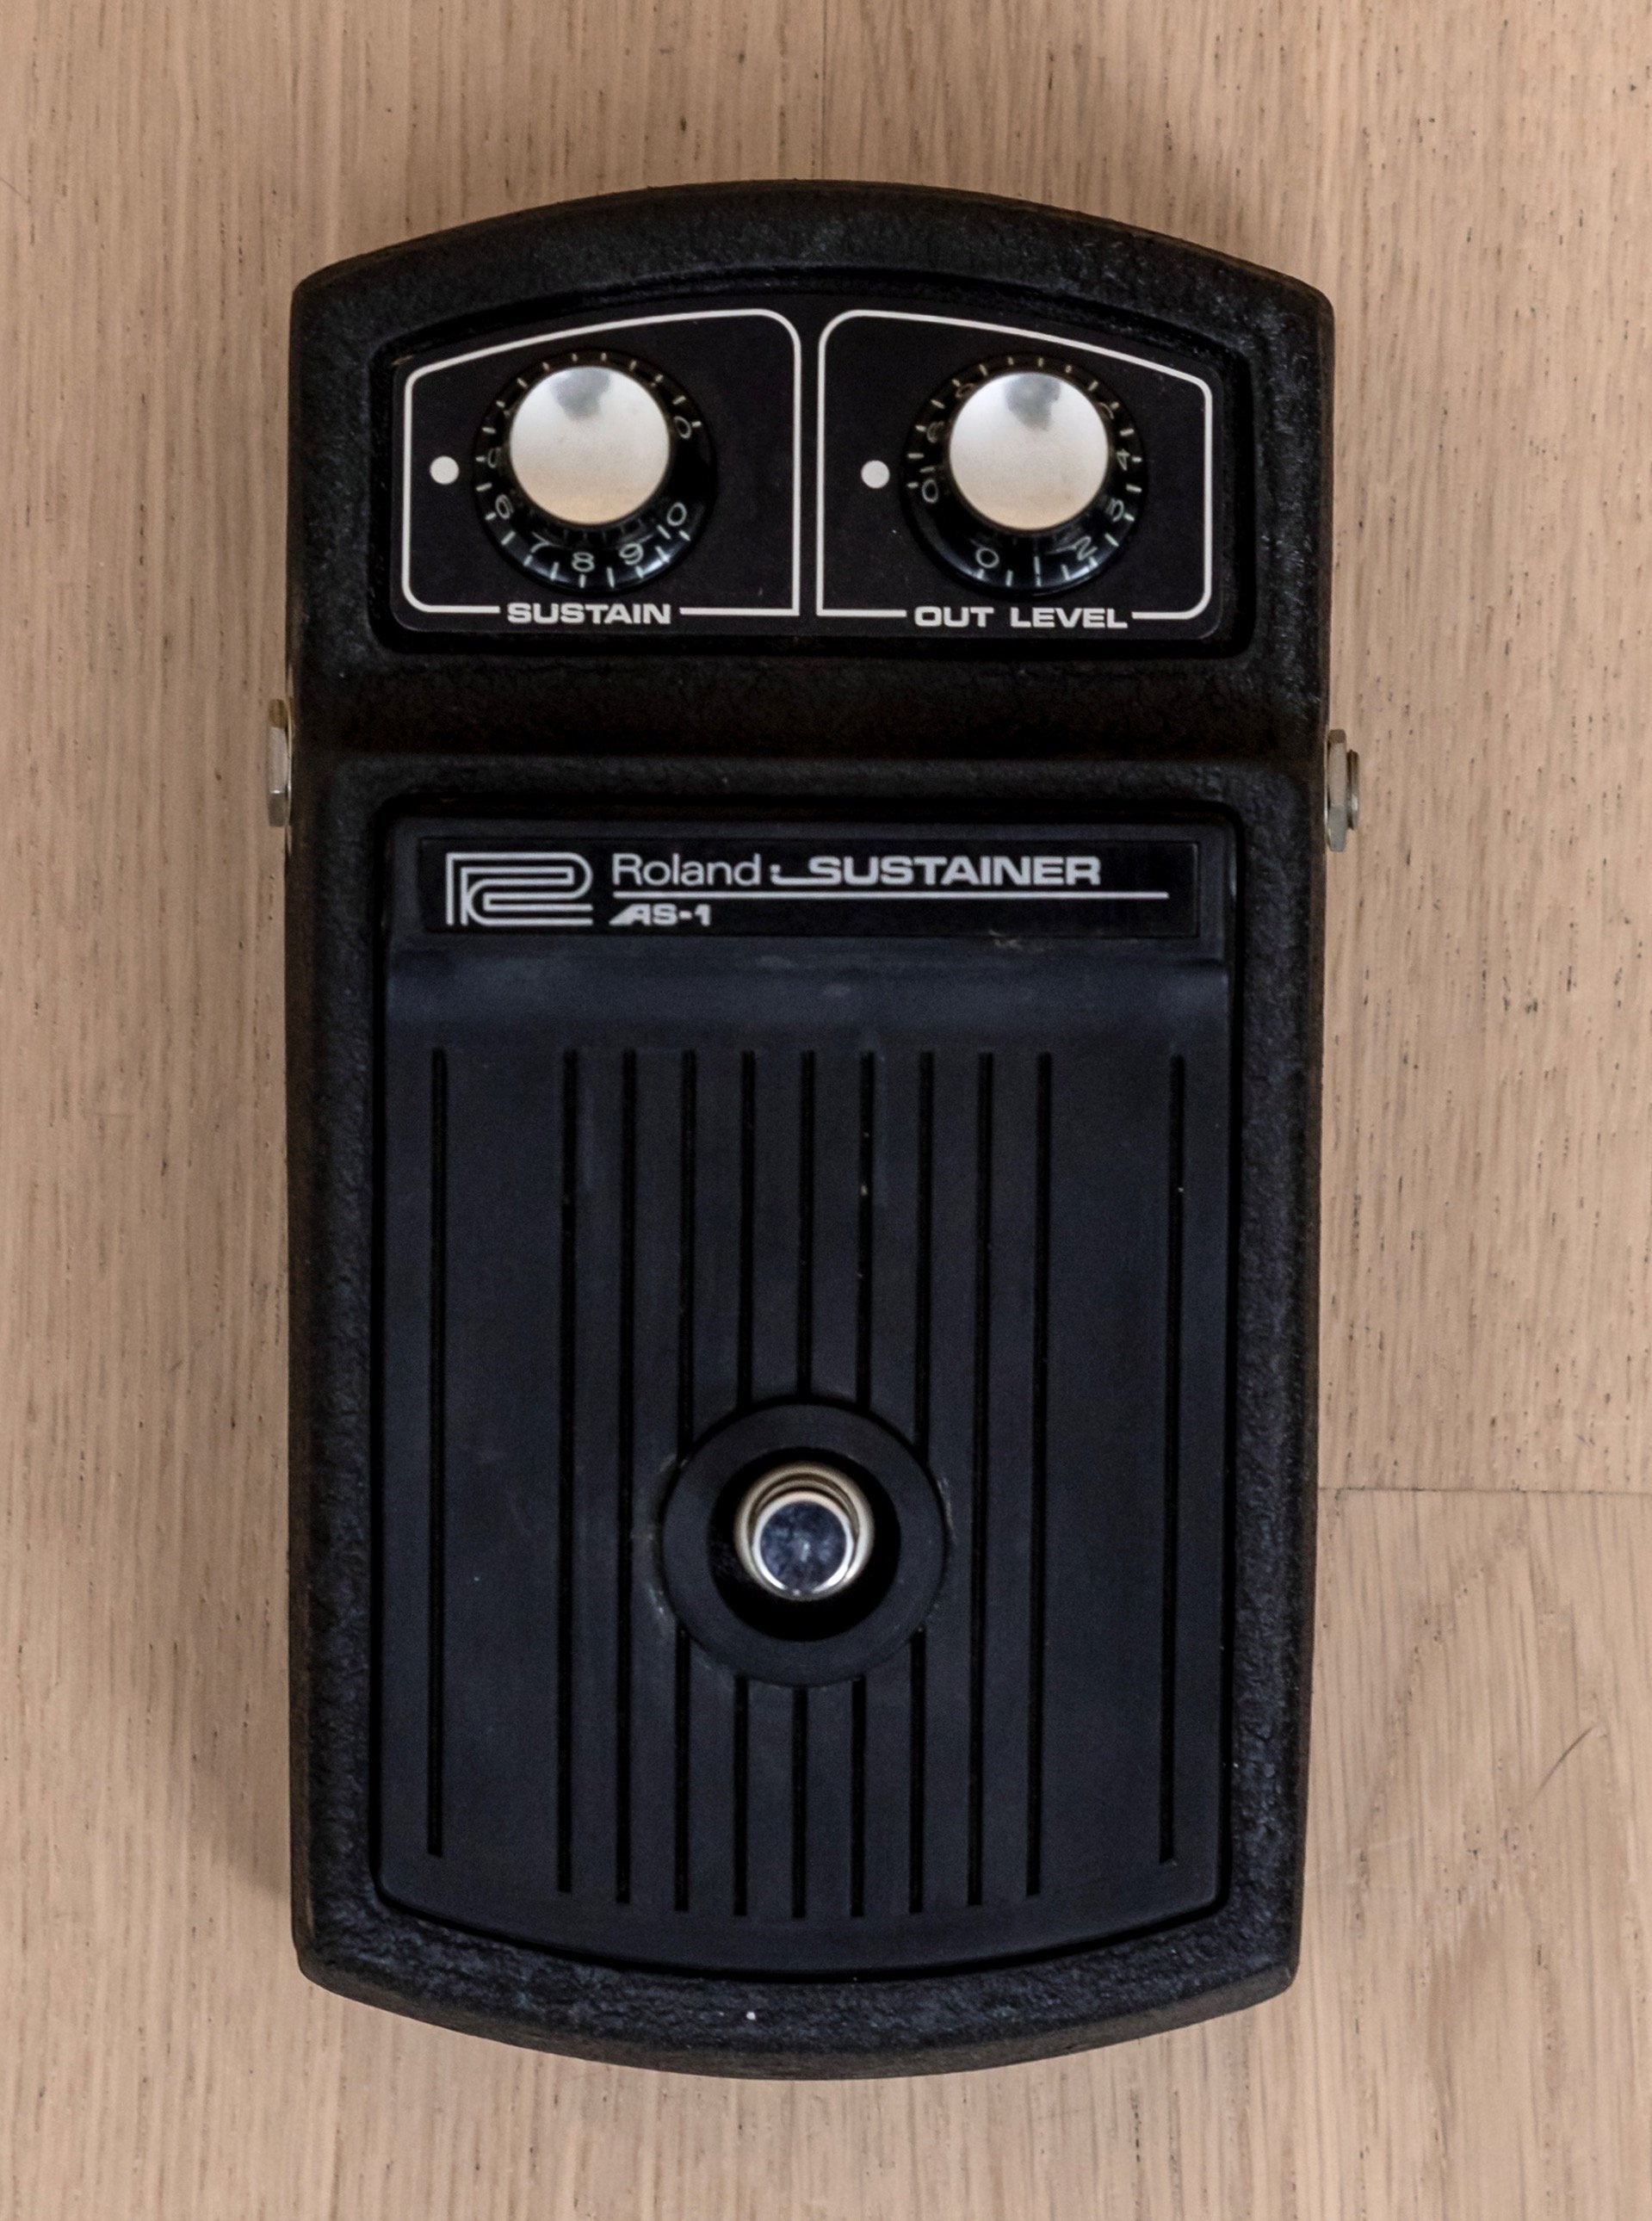 1975 Roland AS-1 Sustainer Vintage Guitar Effects Pedal, Compressor & Overdrive w/ Box, Japan